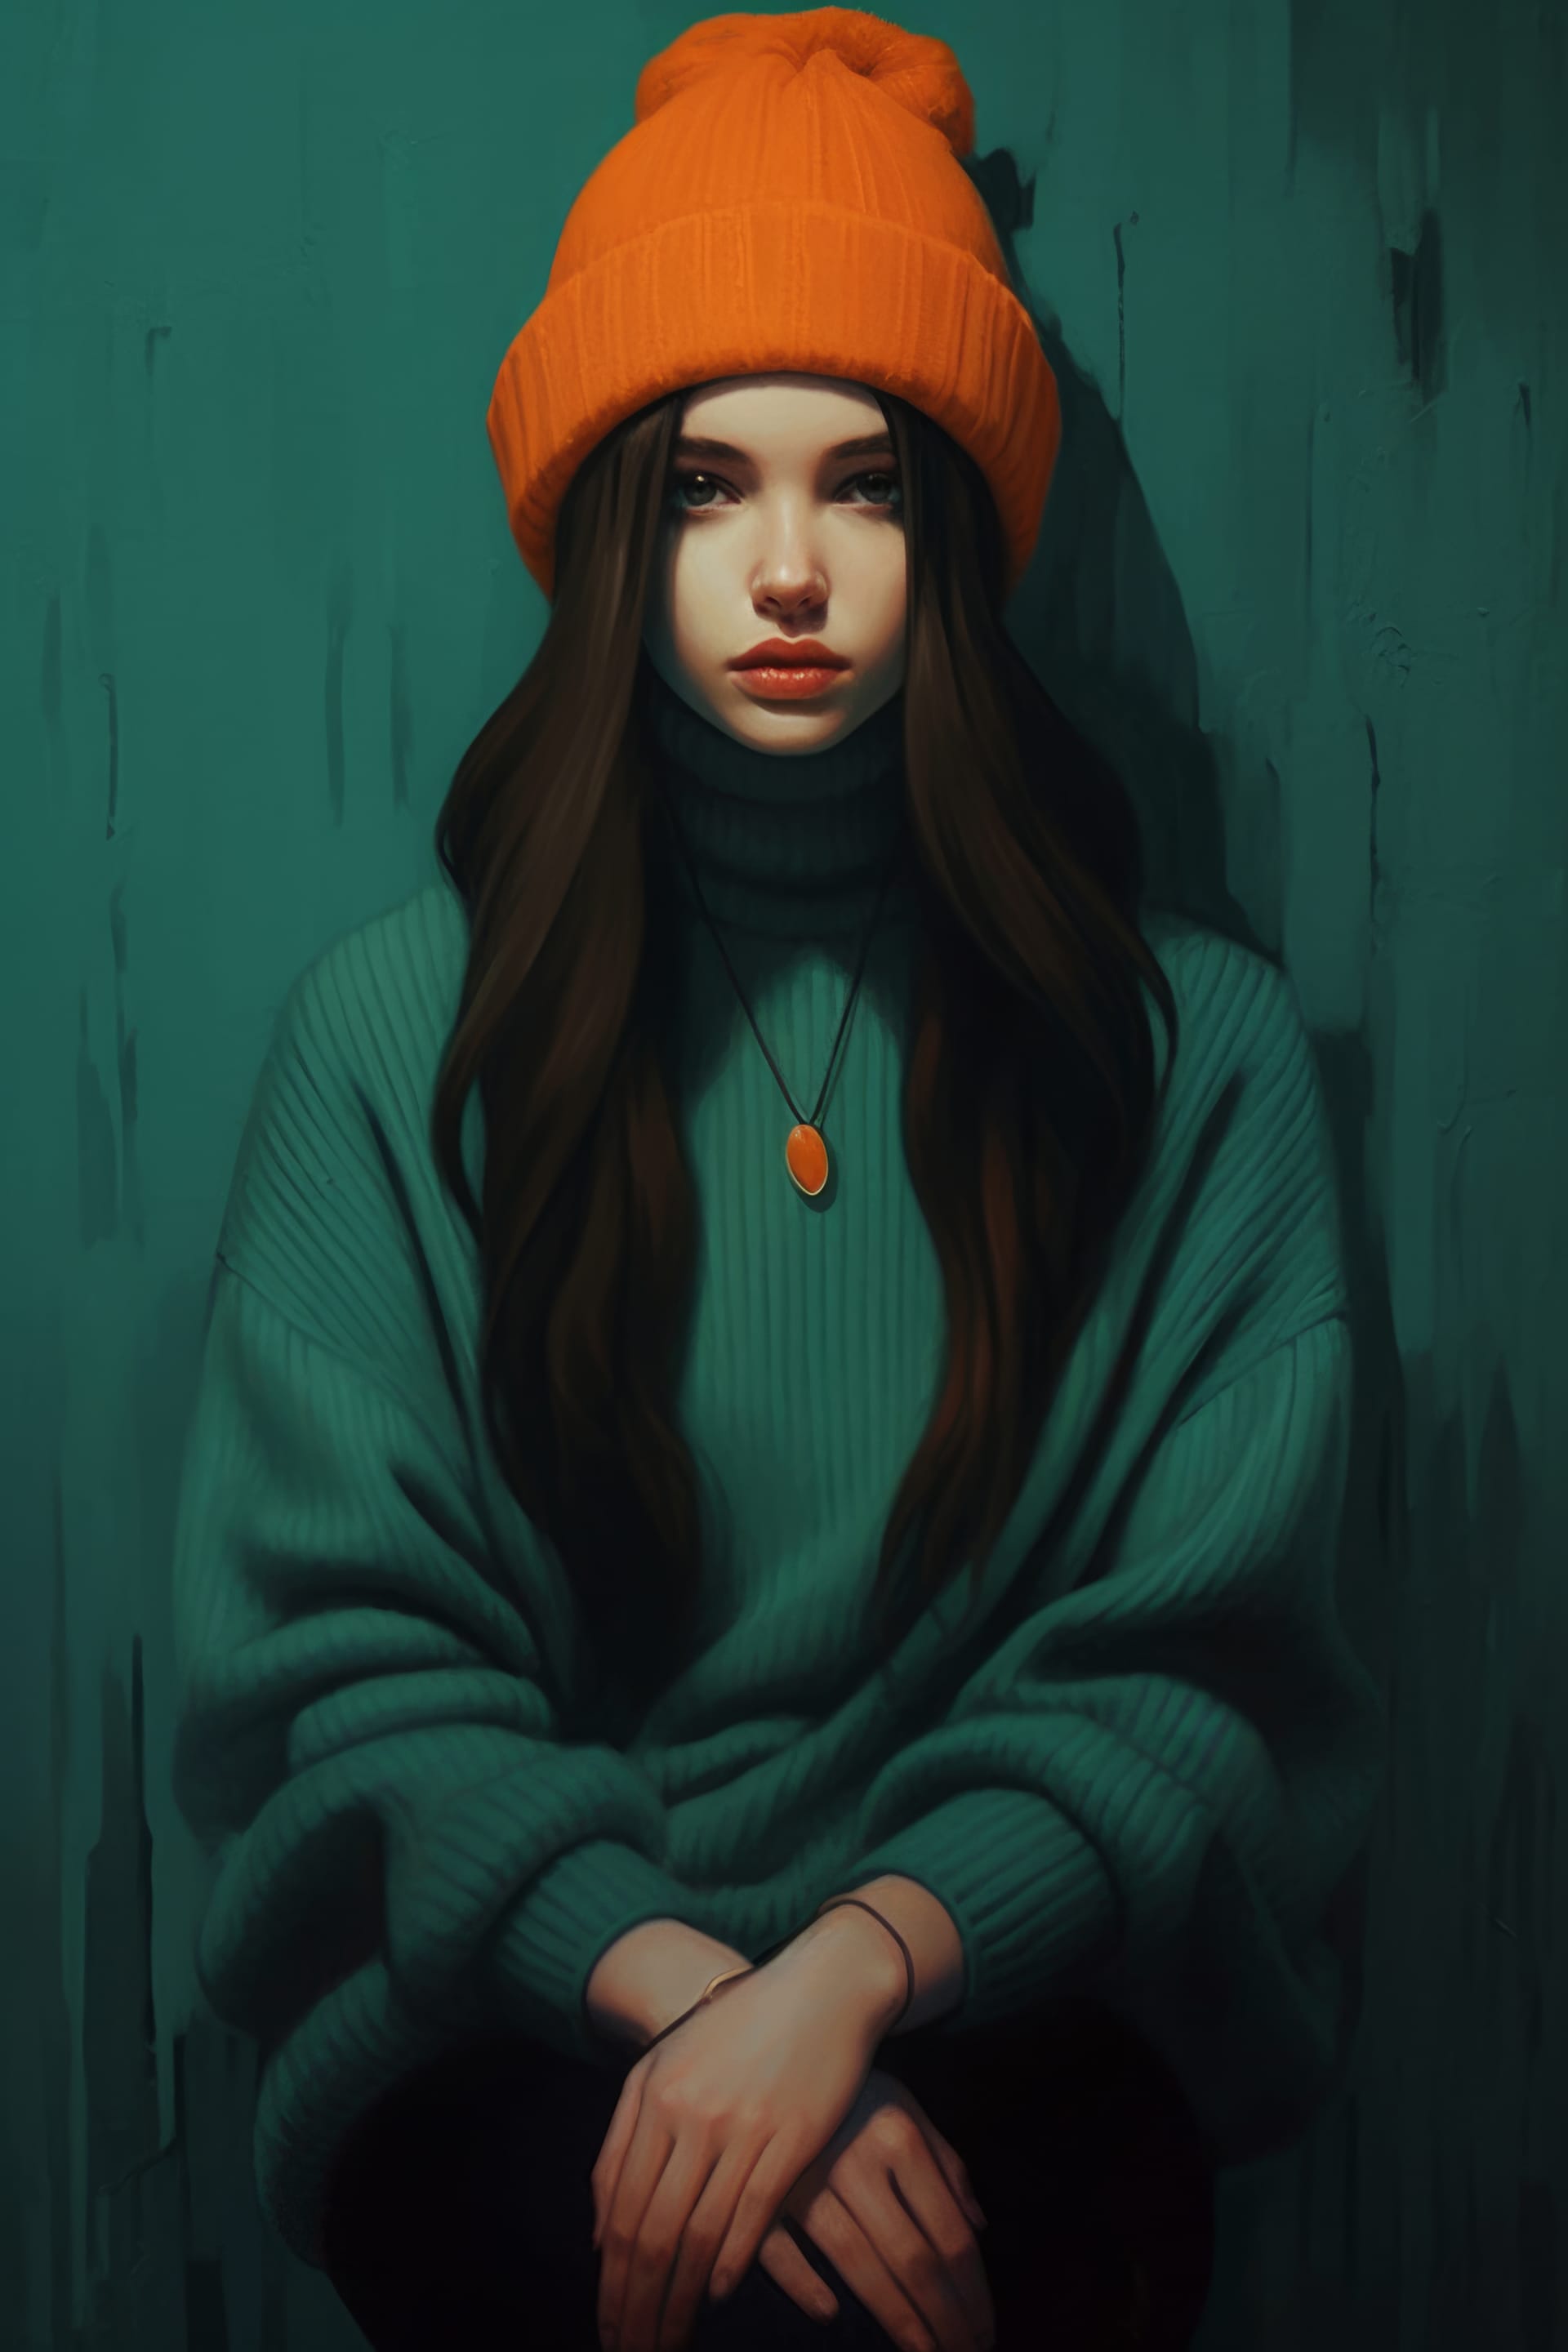 Girl with long brown hair green sweater sits front green wall